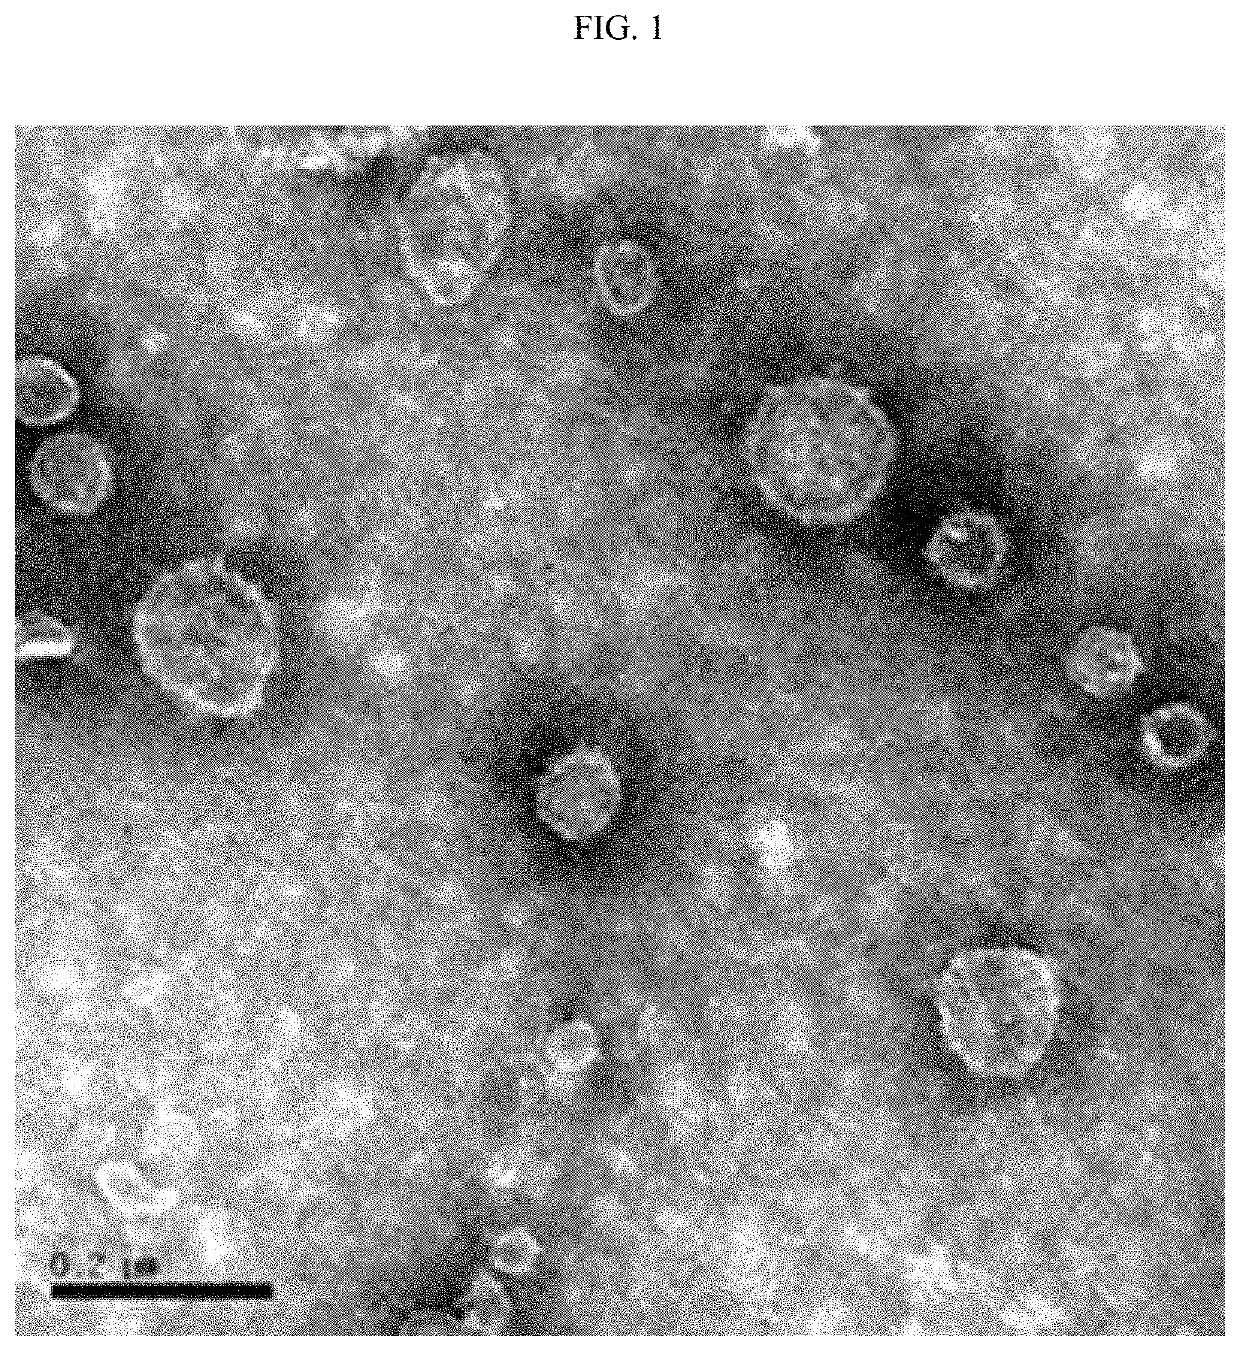 Composition for treating or preventing metabolic disease, containing, as active ingredient, extracellular vesicles derived from akkermansia muciniphila bacteria